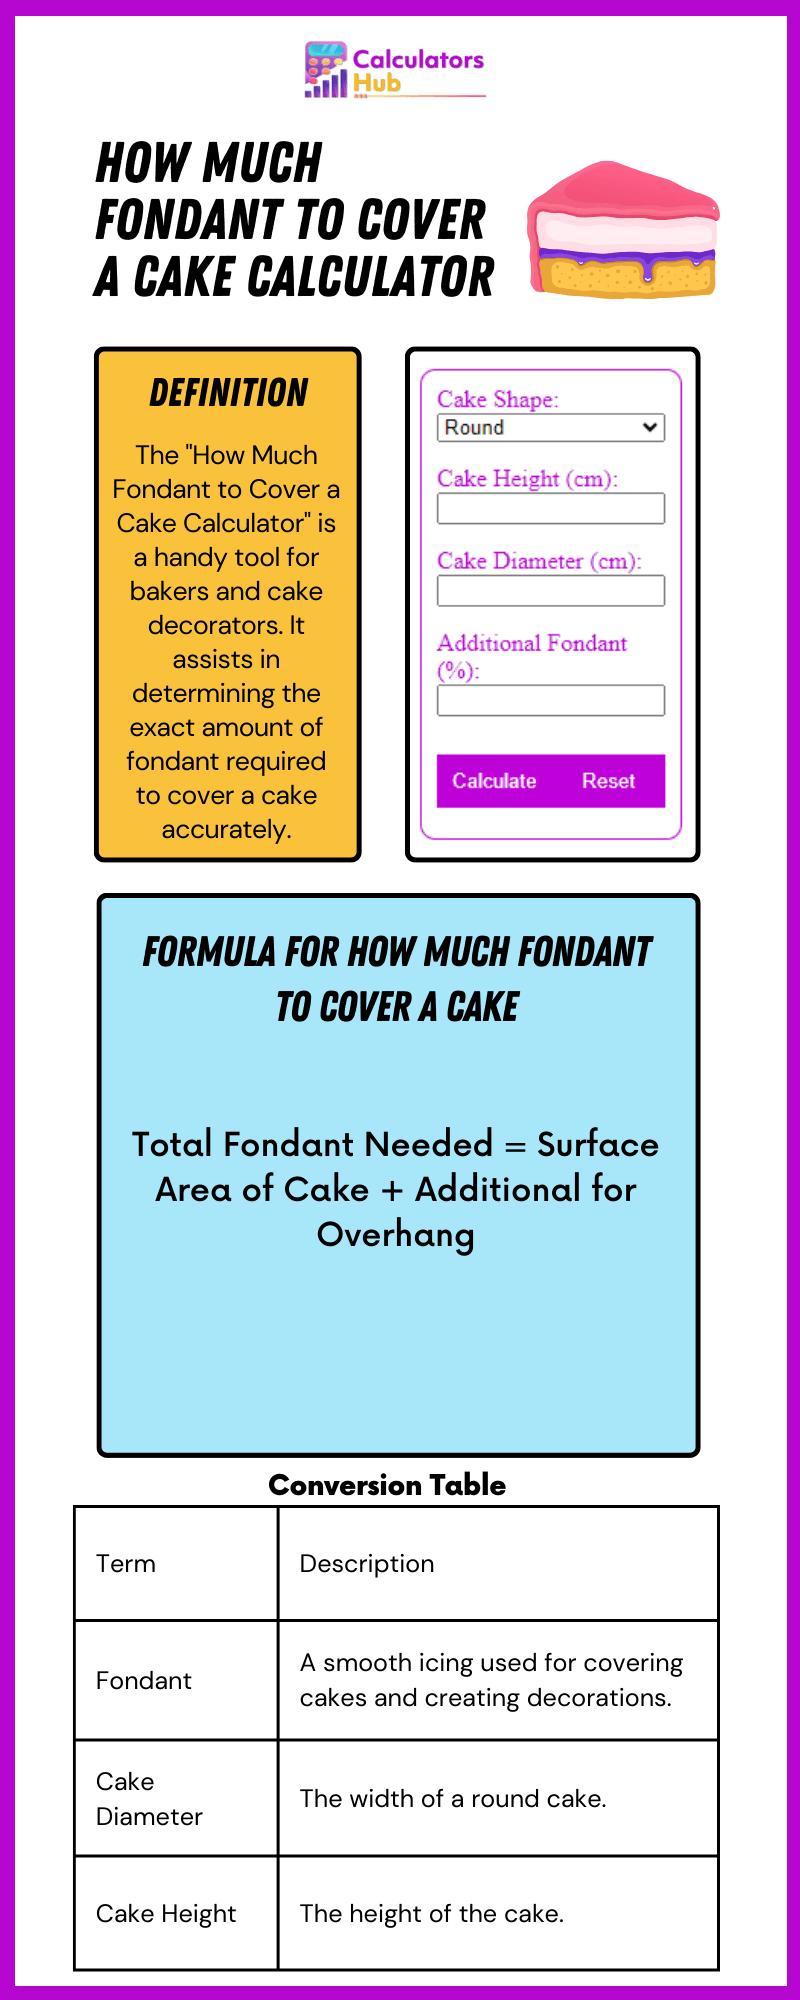 How Much Fondant to Cover a Cake Calculator